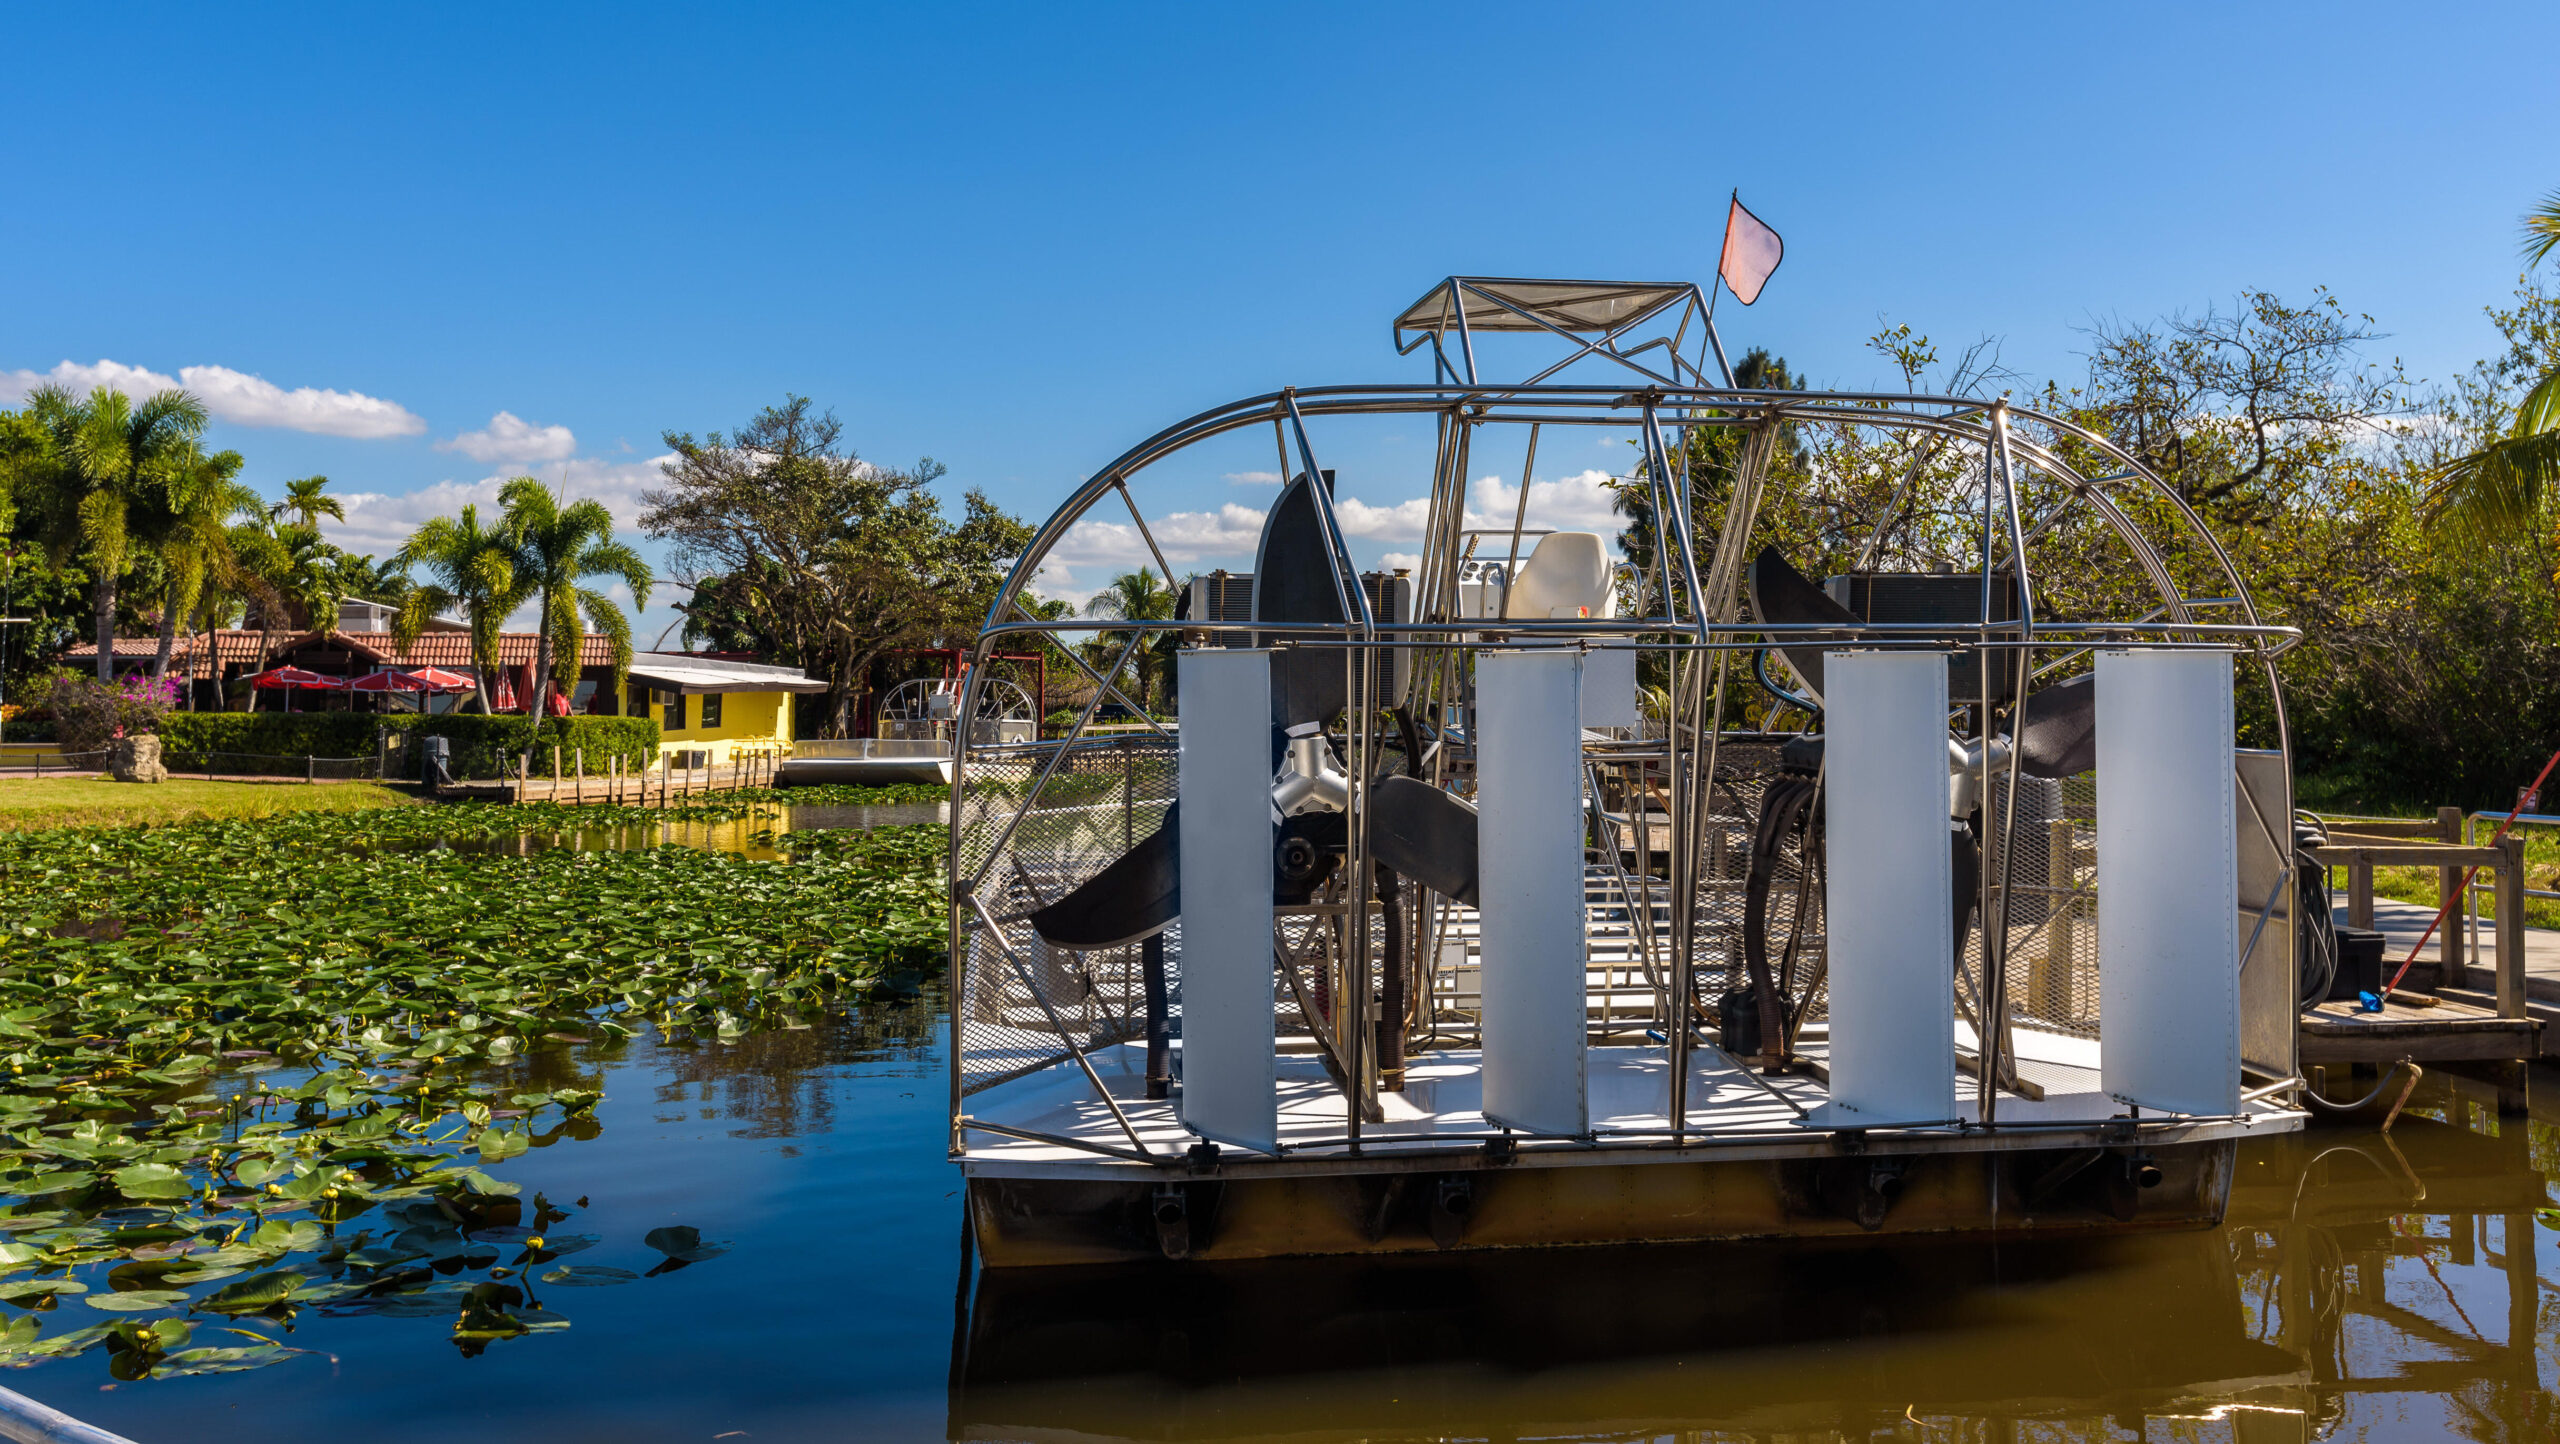 14 Best things to do in Everglades National Park, FL